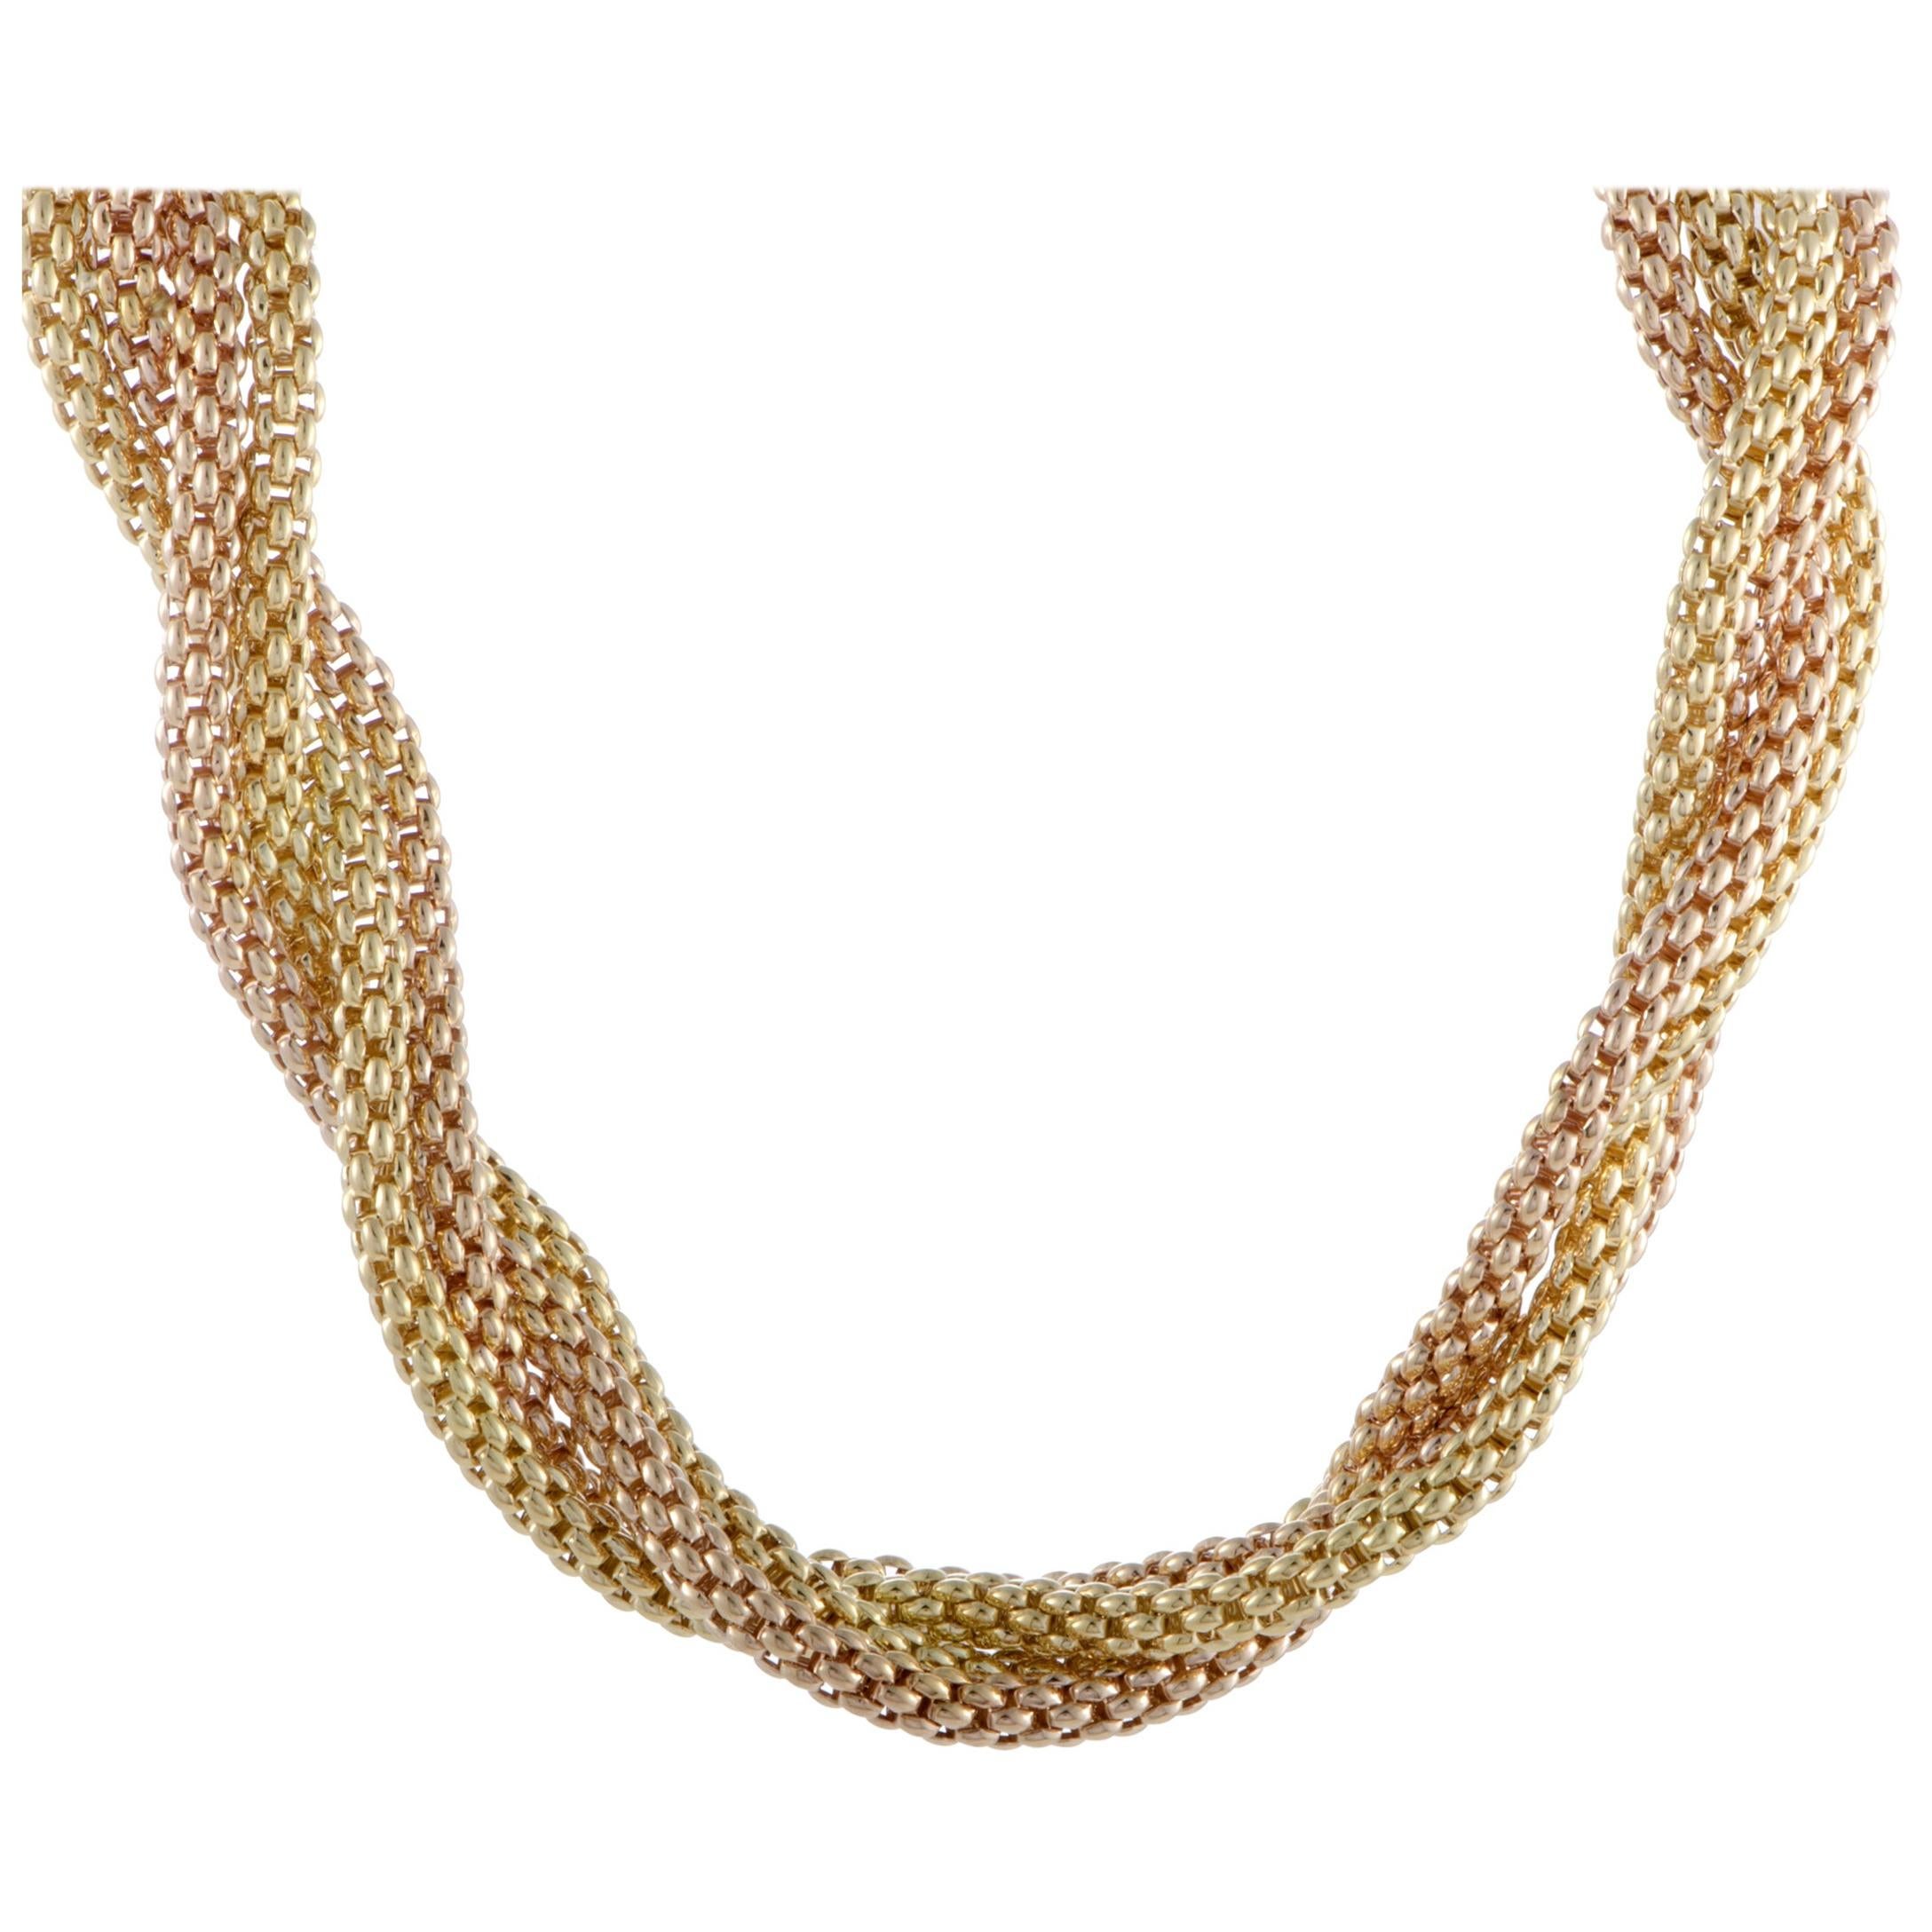 Fope 18 Karat Yellow and Rose Gold Two-Tone Chain Necklace